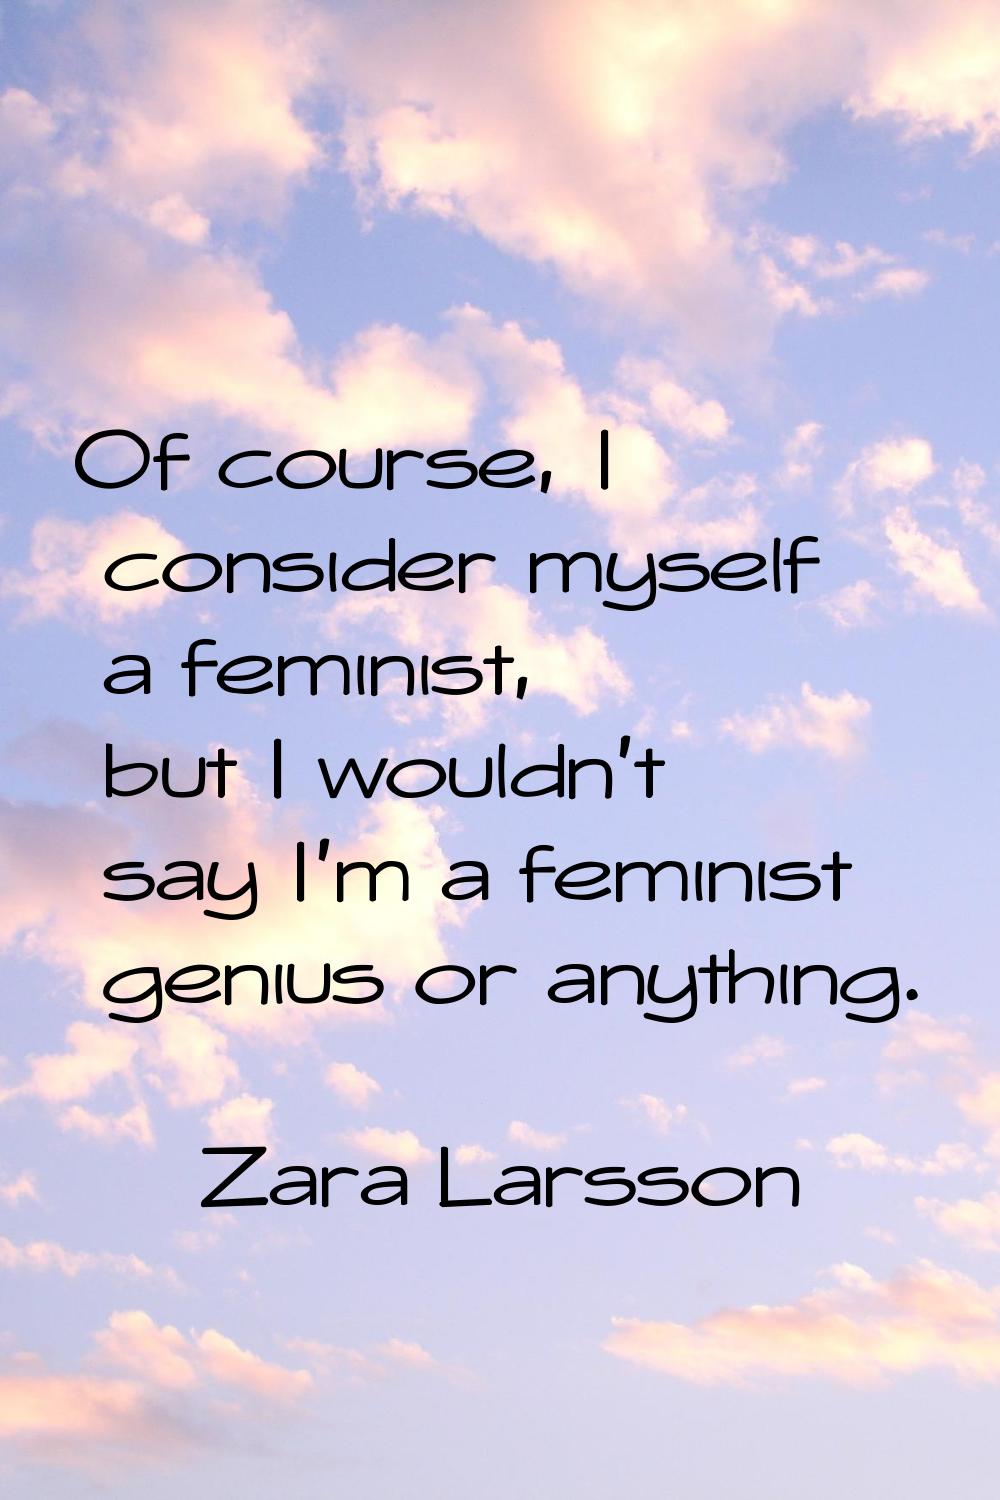 Of course, I consider myself a feminist, but I wouldn't say I'm a feminist genius or anything.